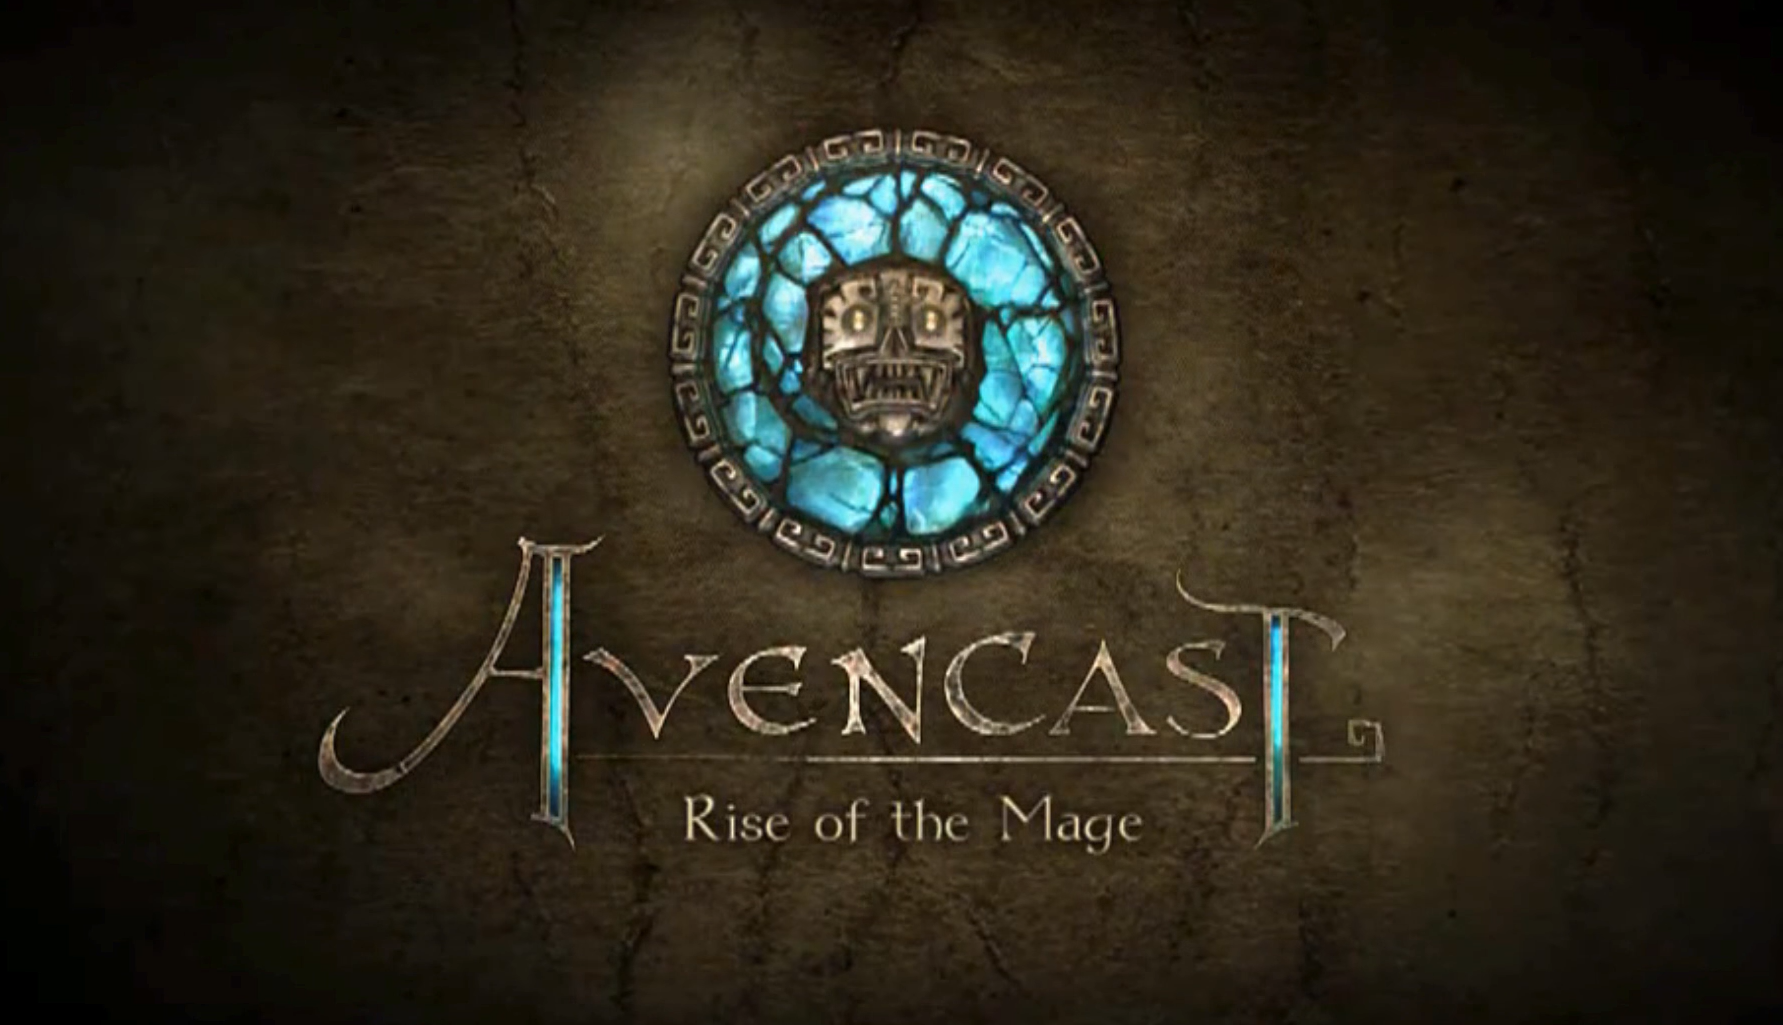 Avencast - Rise Of The Mage downloading